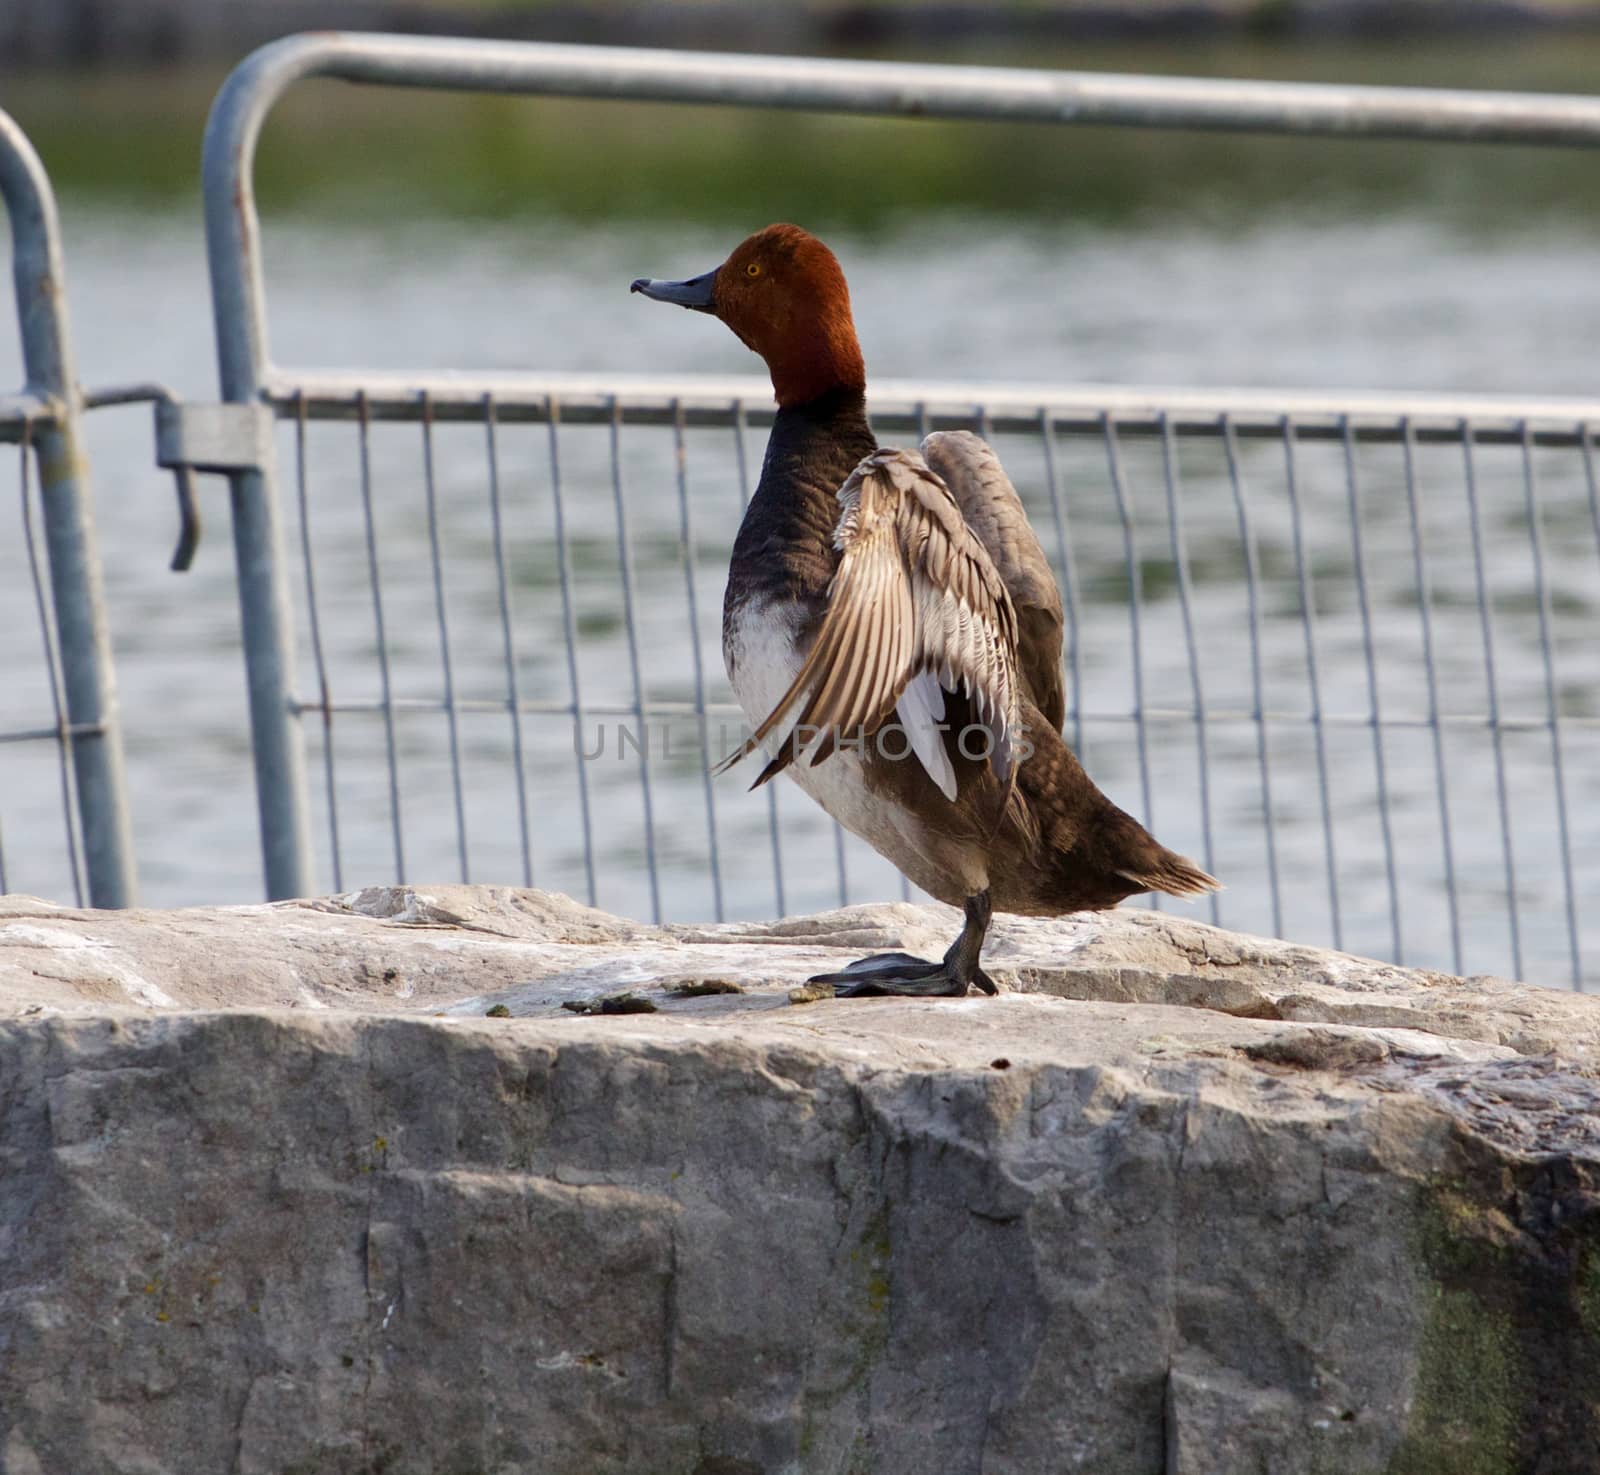 The redhead duck shows her wings on the rock